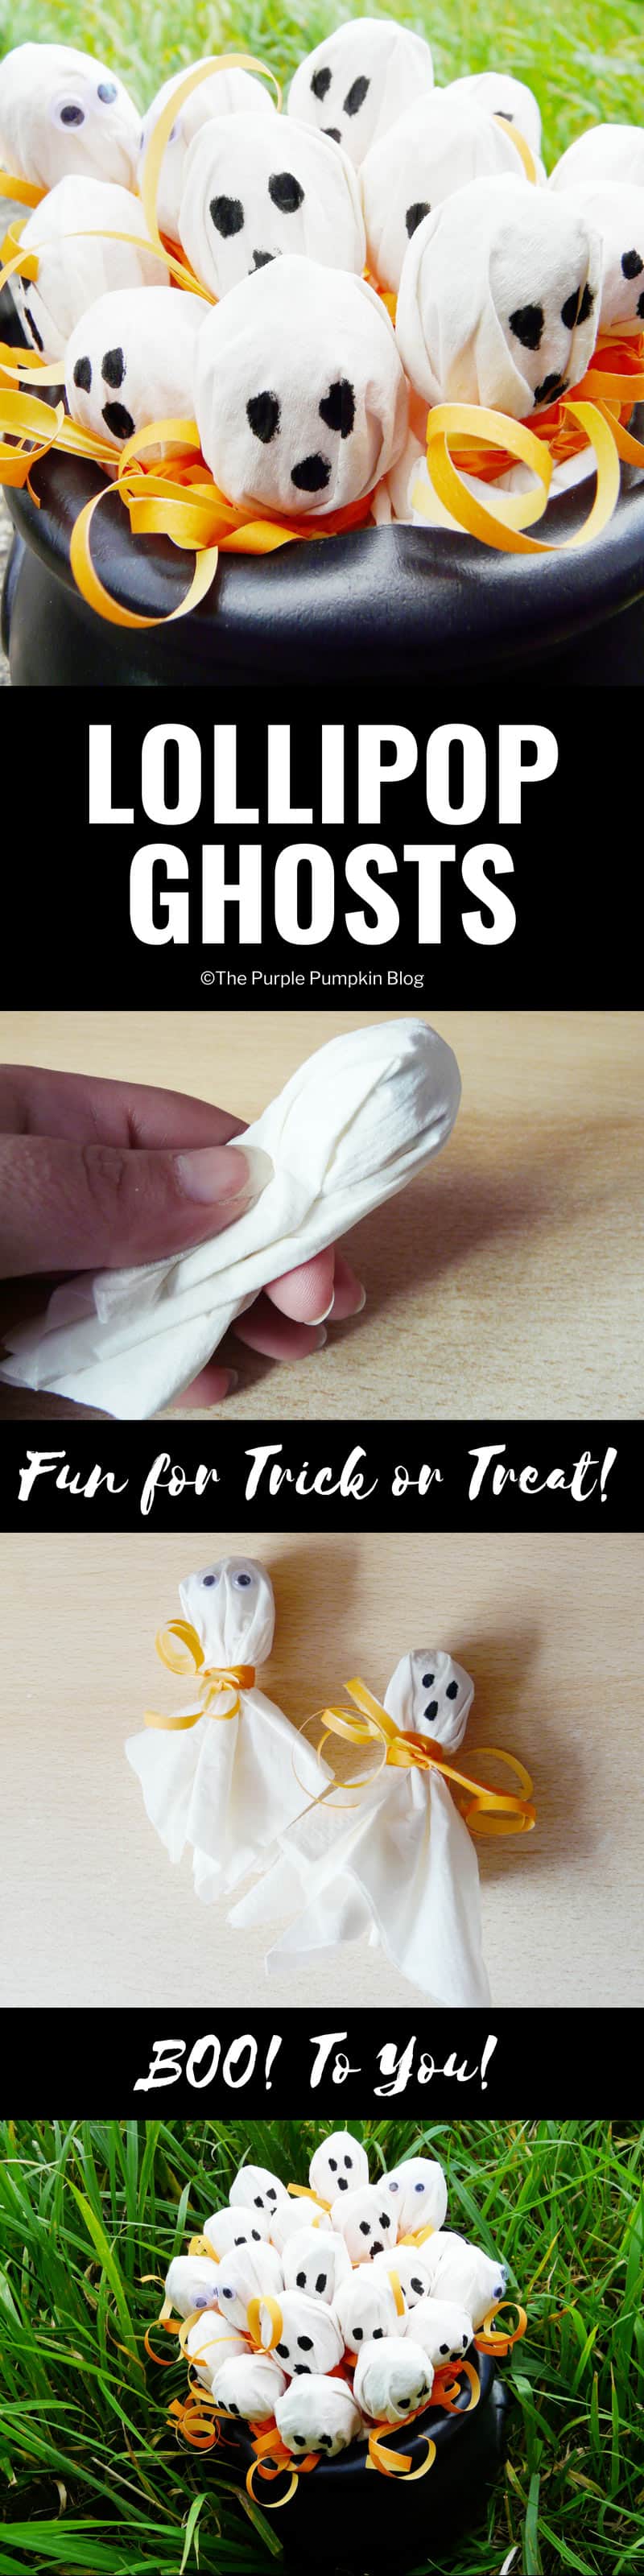 Lollipop Ghosts / Turn lollipops/suckers into cute little ghosts for Trick or Treaters! All you need are some white napkins, ribbon and a black marker pen! And of course the candy!